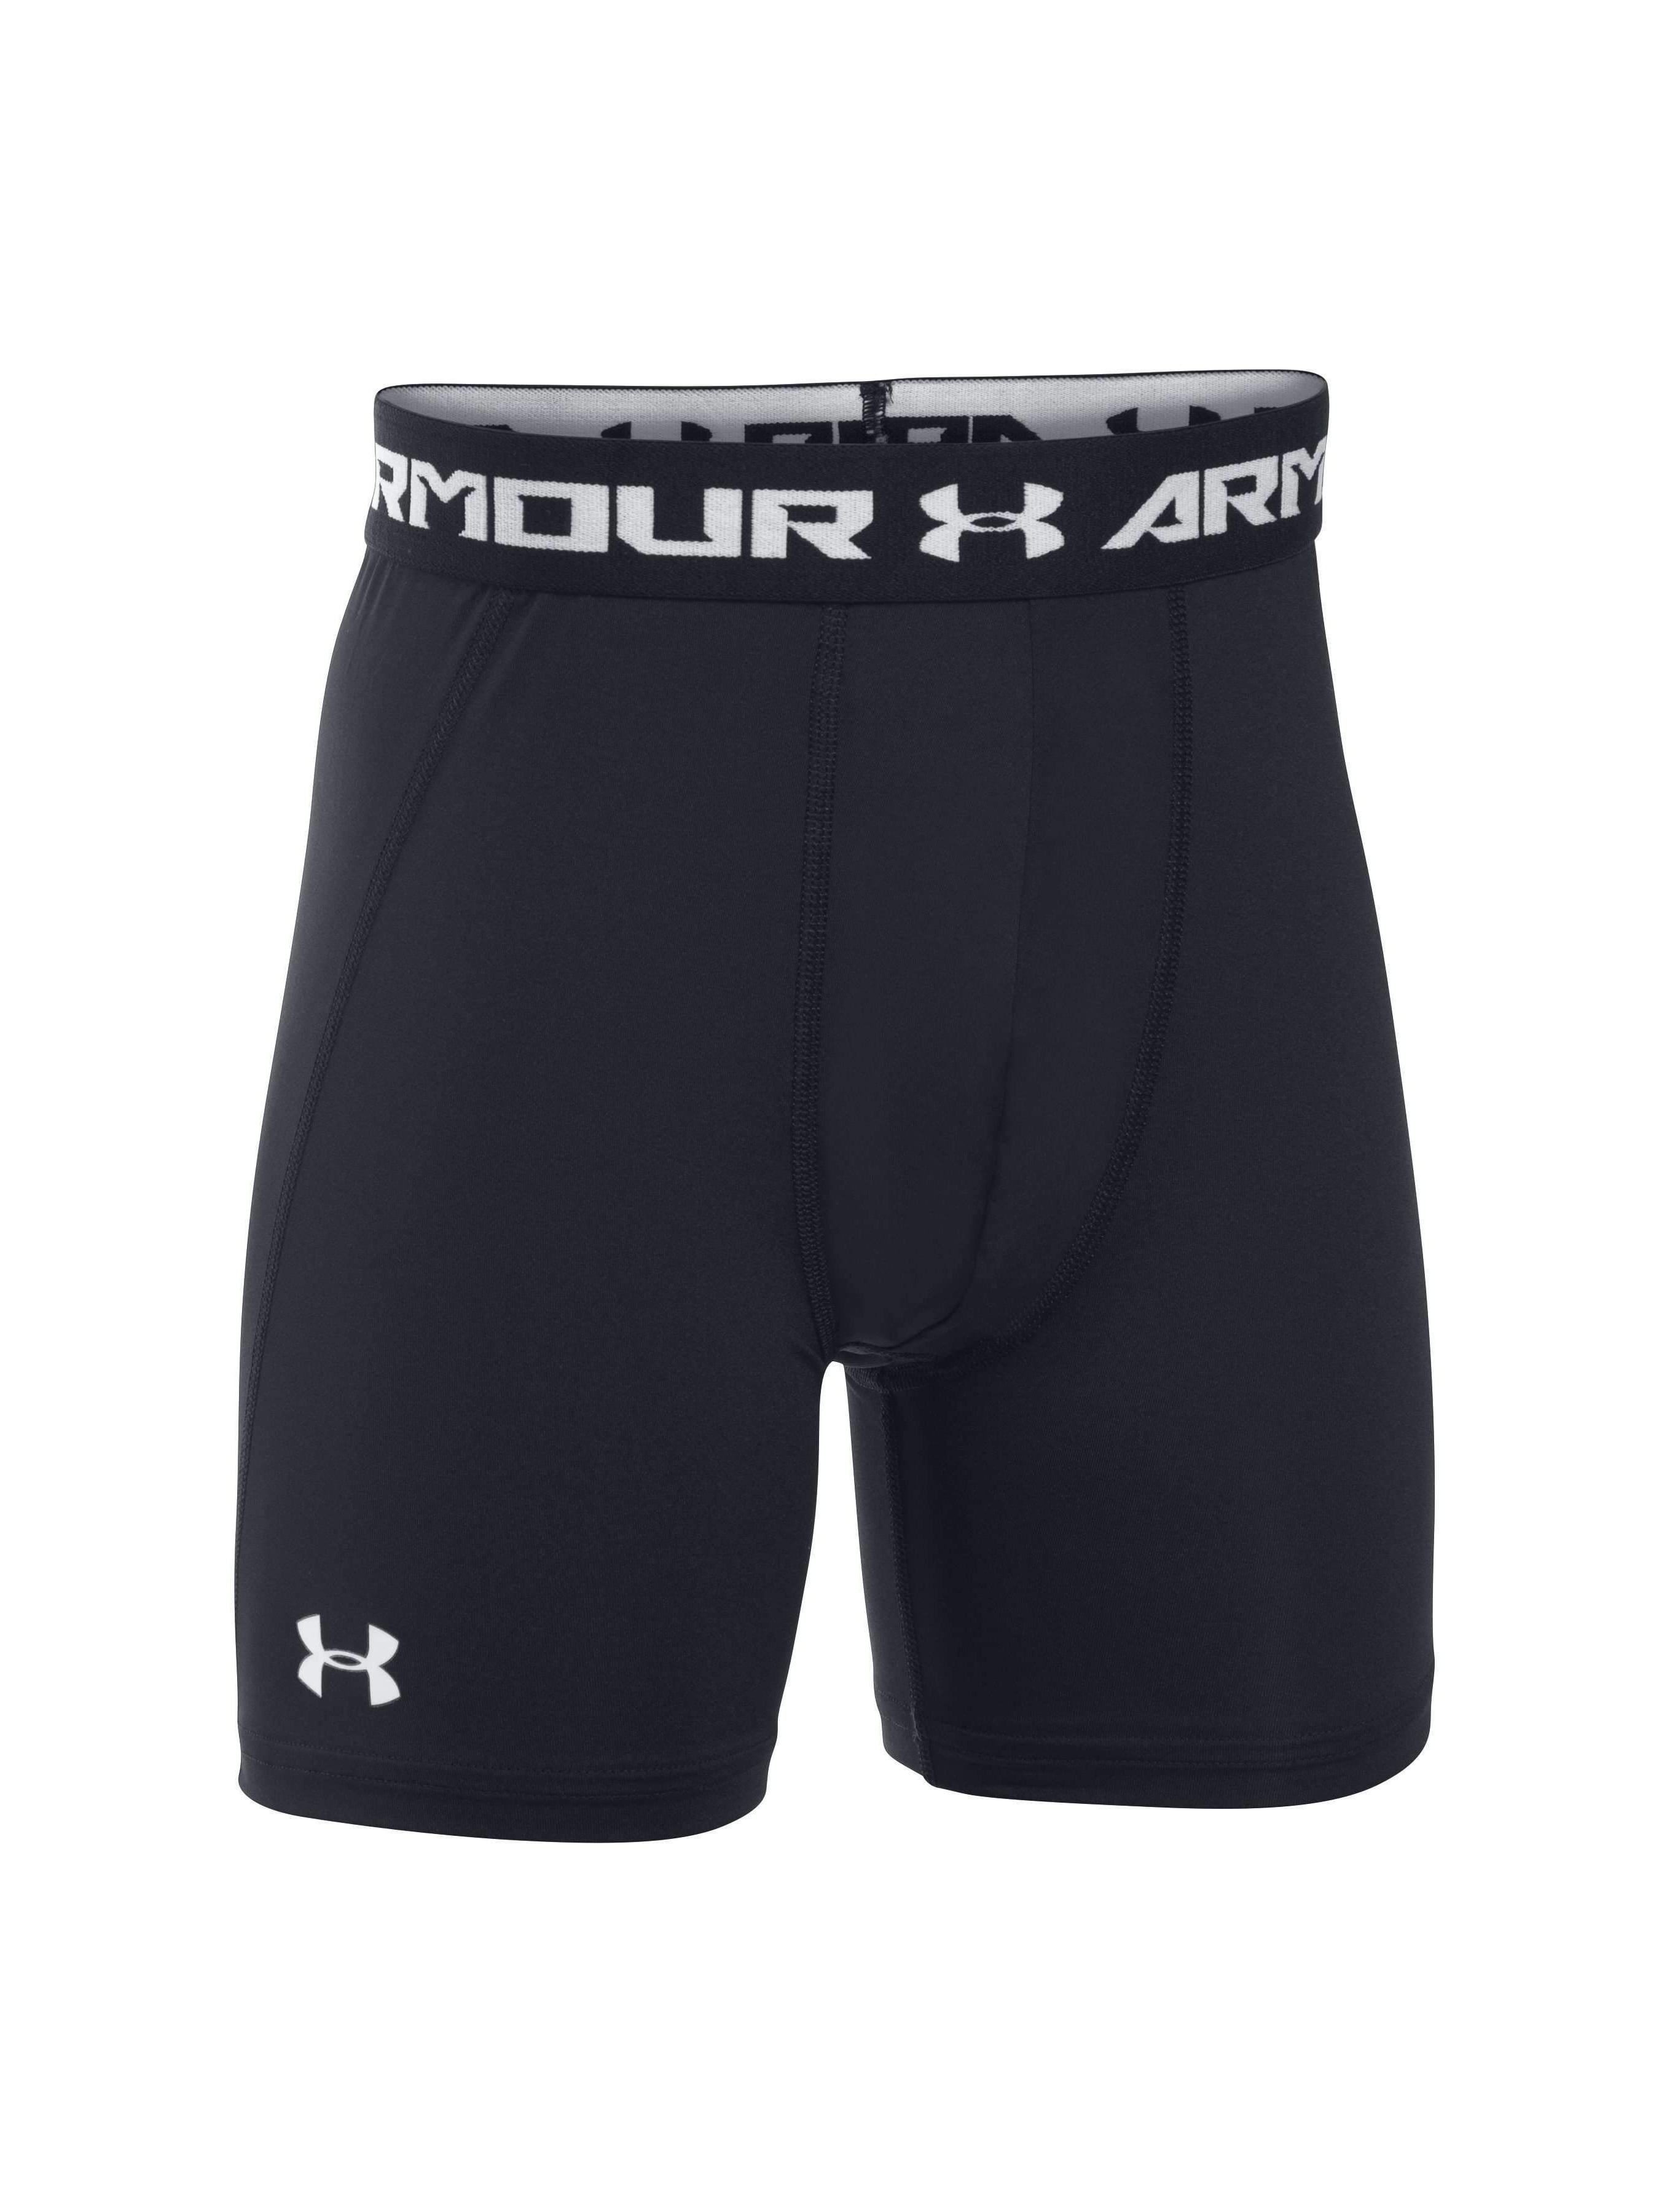 Under Armour Boy's Mid Shorts 